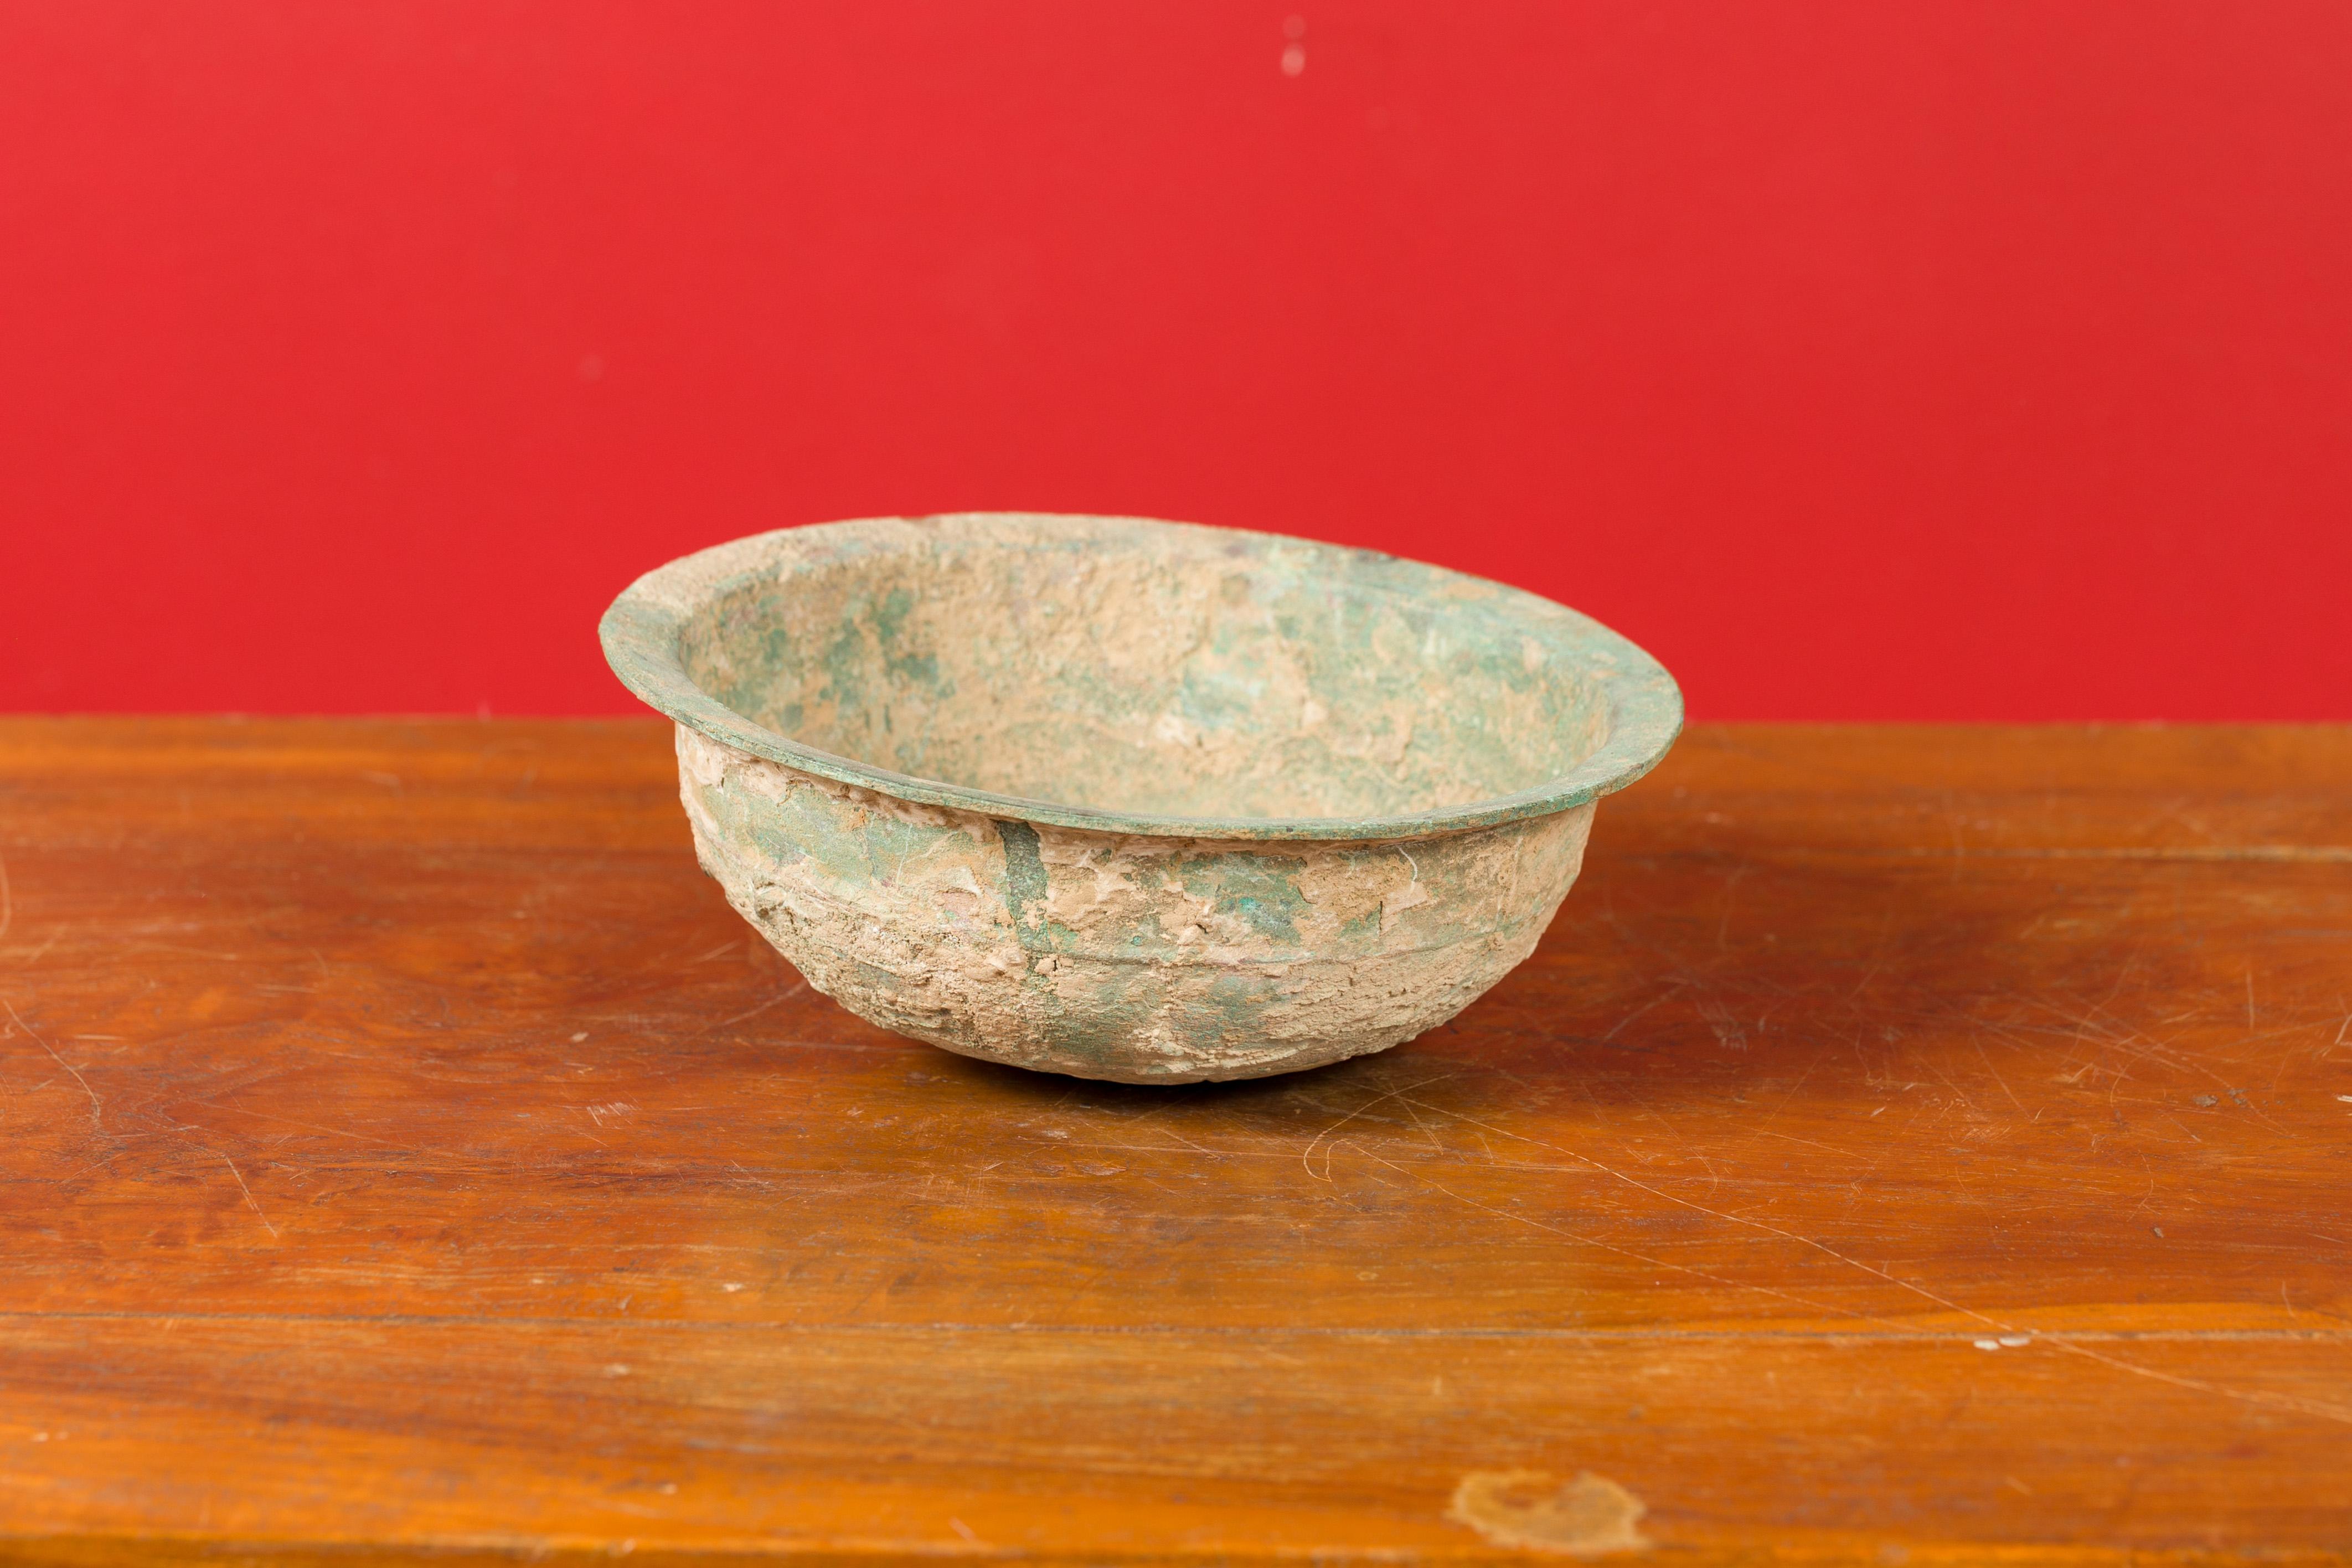 Chinese Han Dynasty Bronze Bowl circa 202 BC-200 AD with Mineral Deposits 5